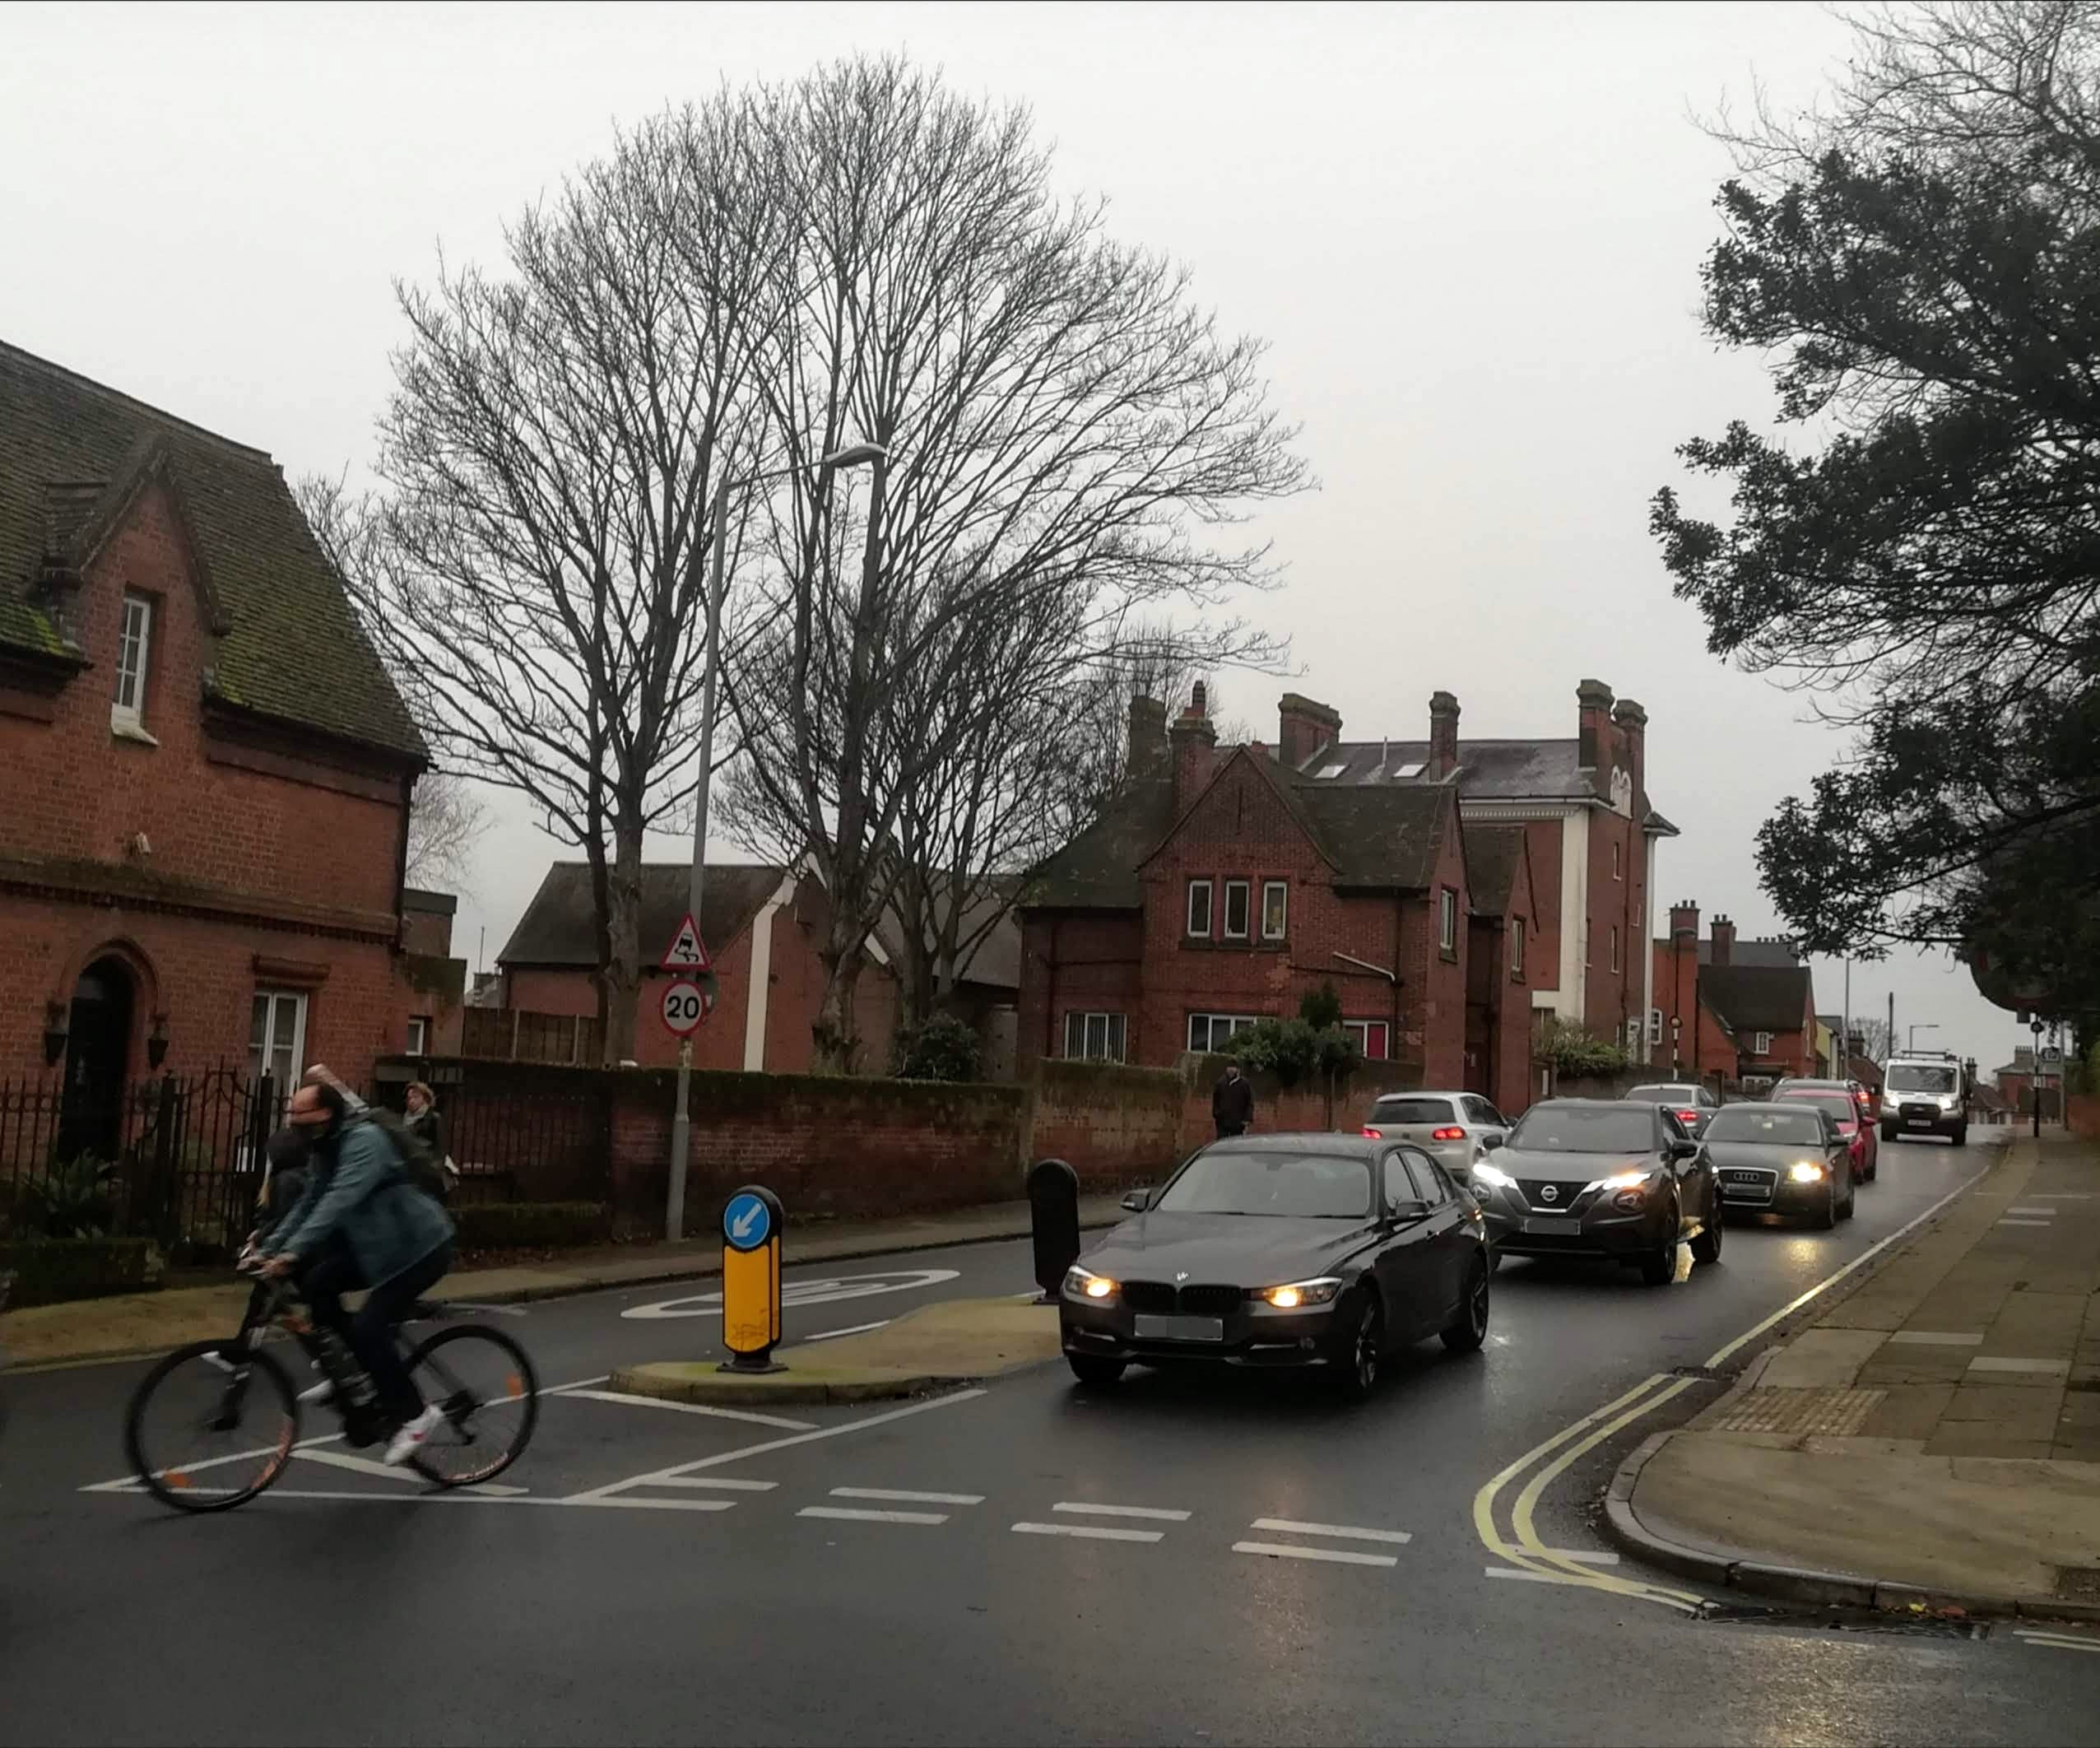 Cars and a cyclist on a road in Ipswich